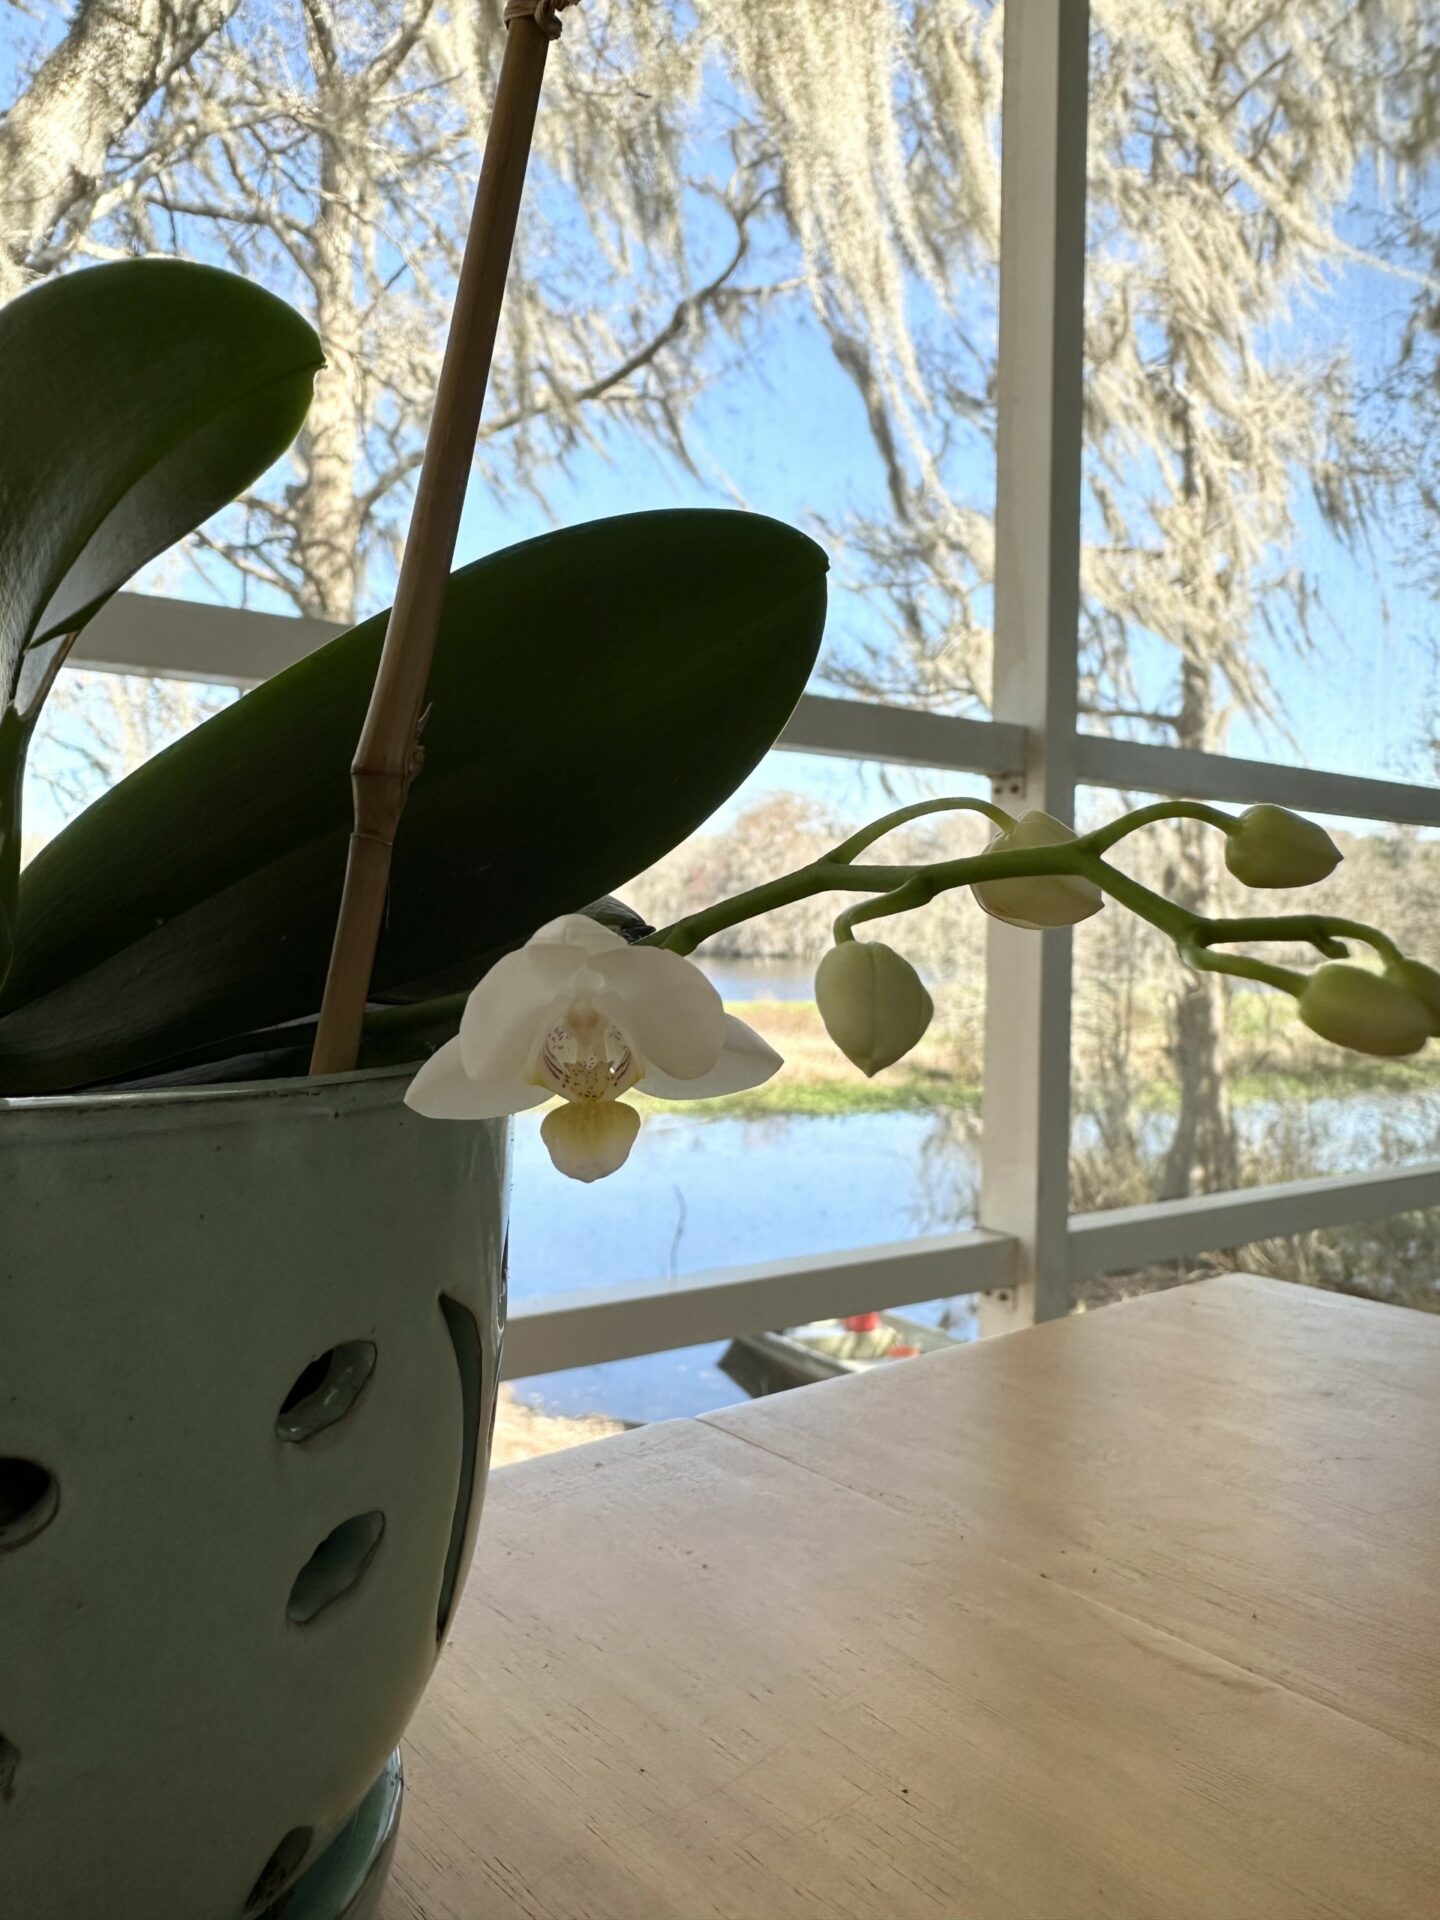 budding orchid with one bloom